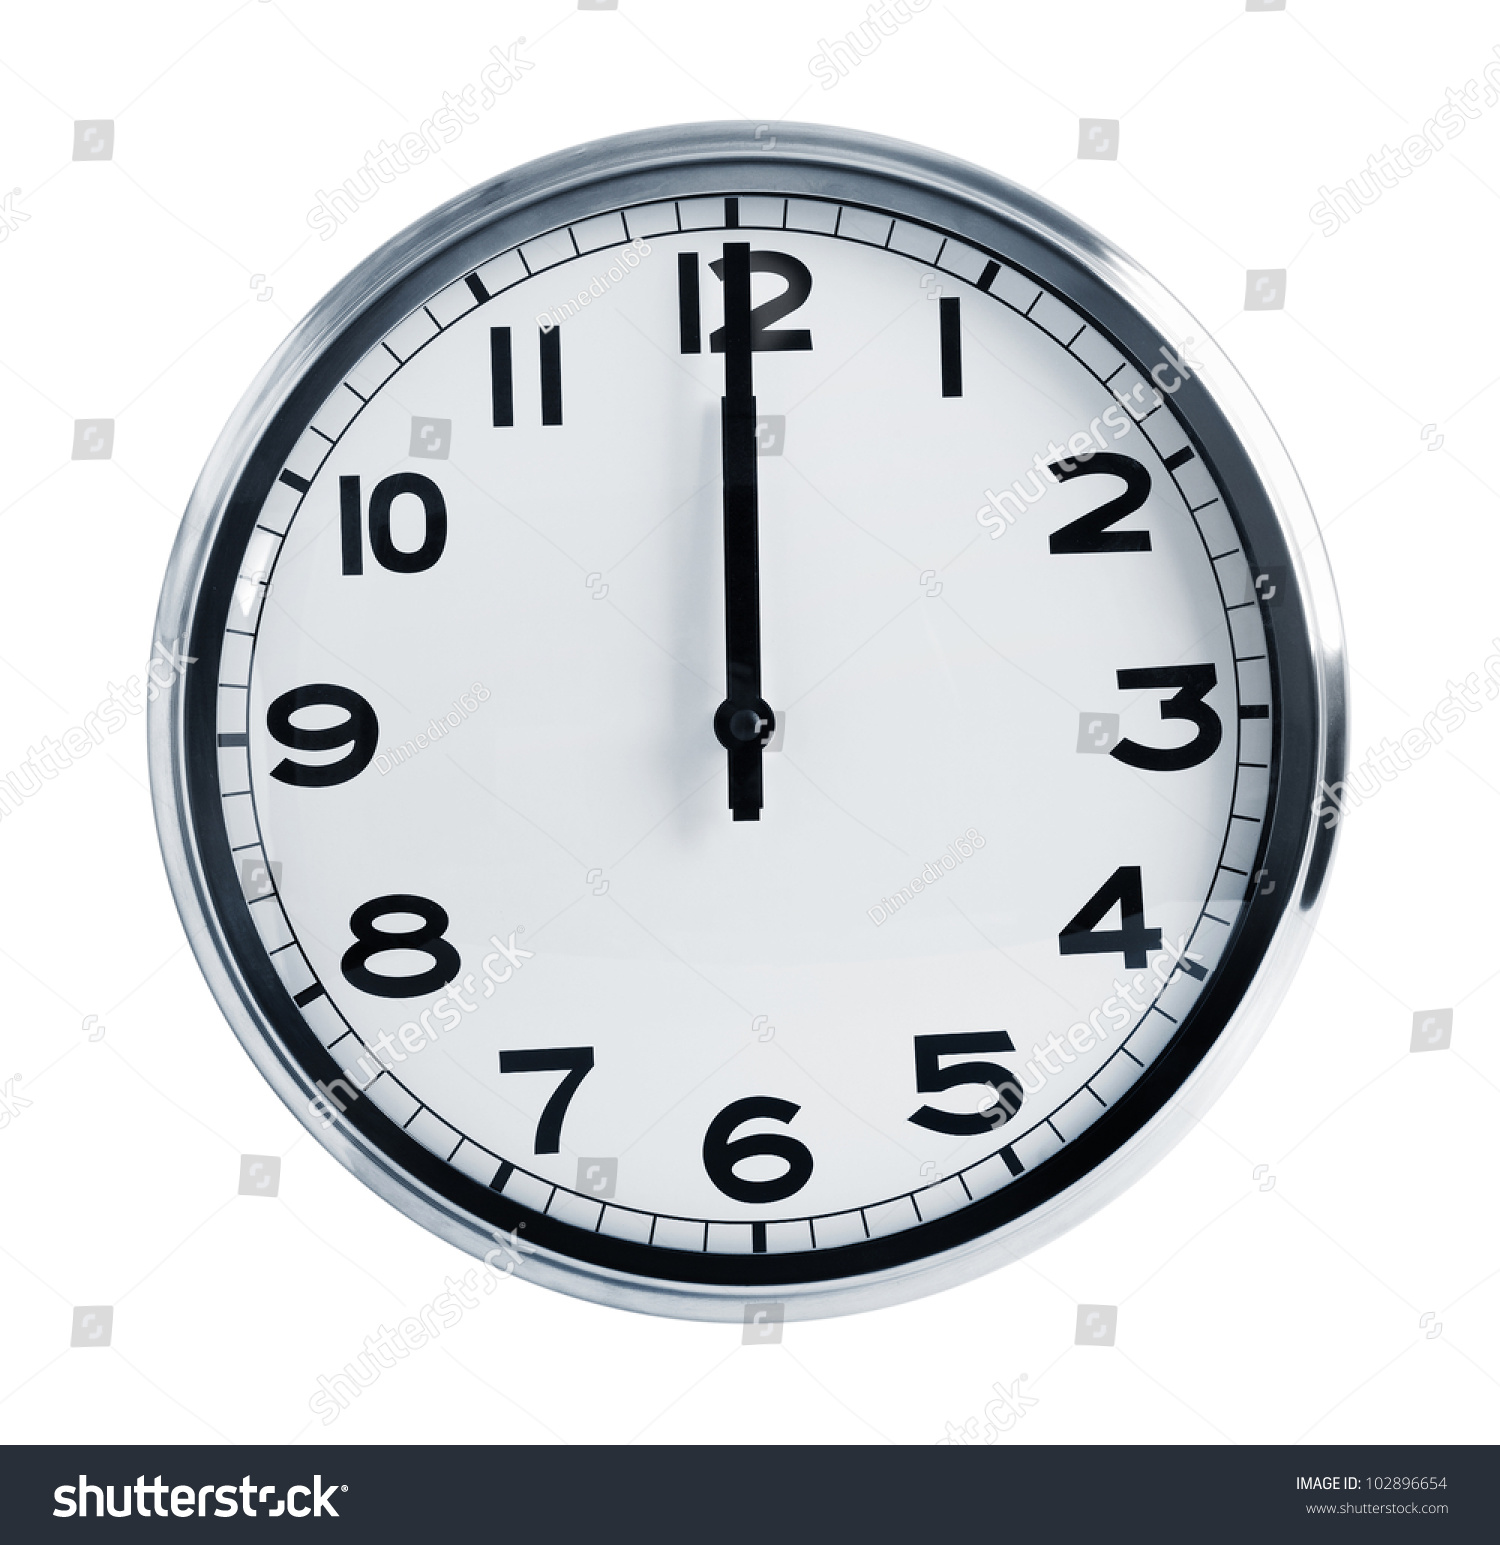 Royalty-free Wall office clock showing at noon on a… #102896654 ...